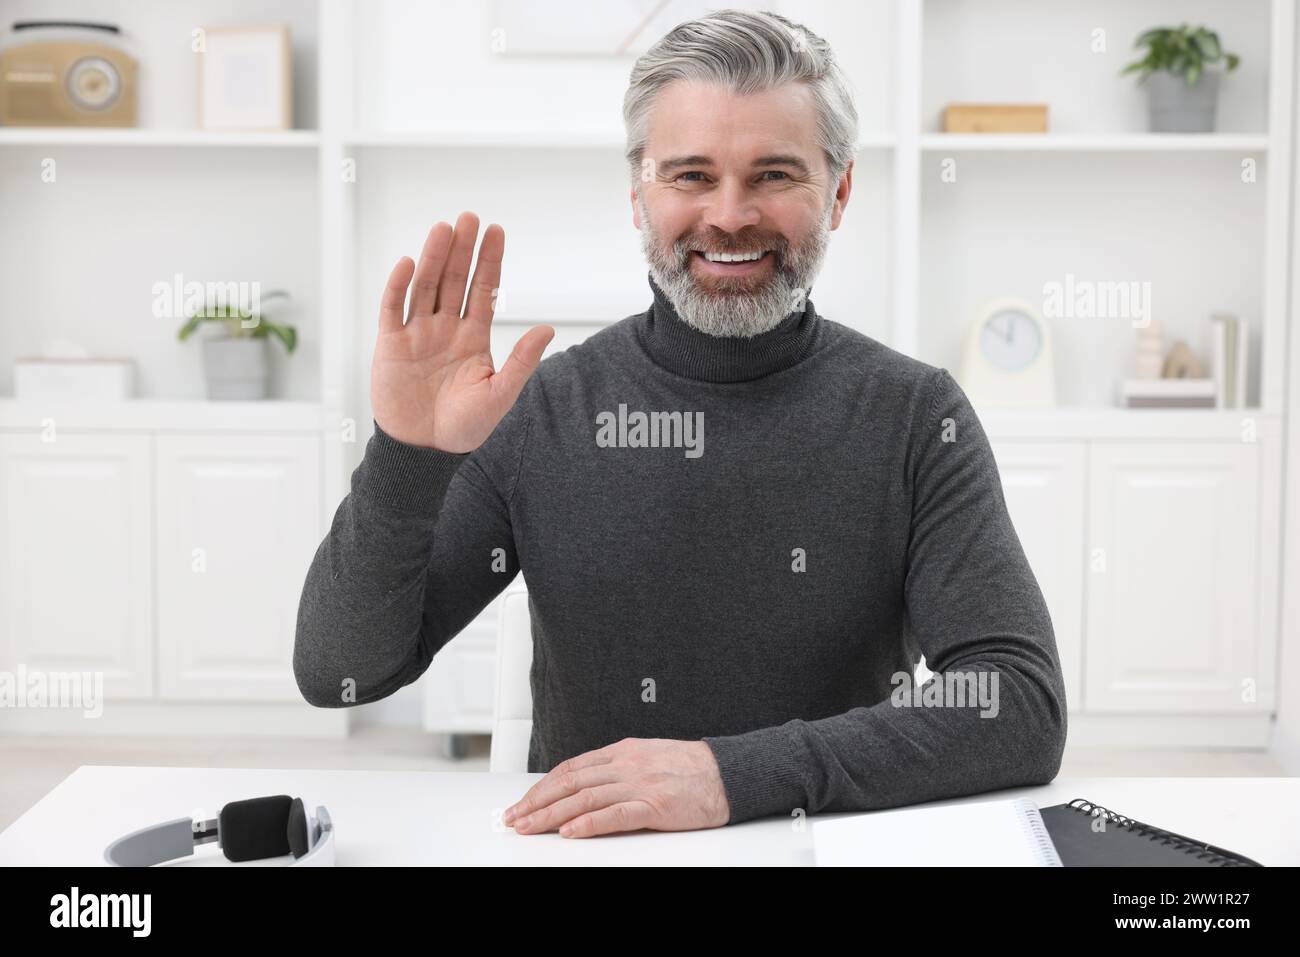 Man waving hello during video chat at home, view from webcam Stock Photo